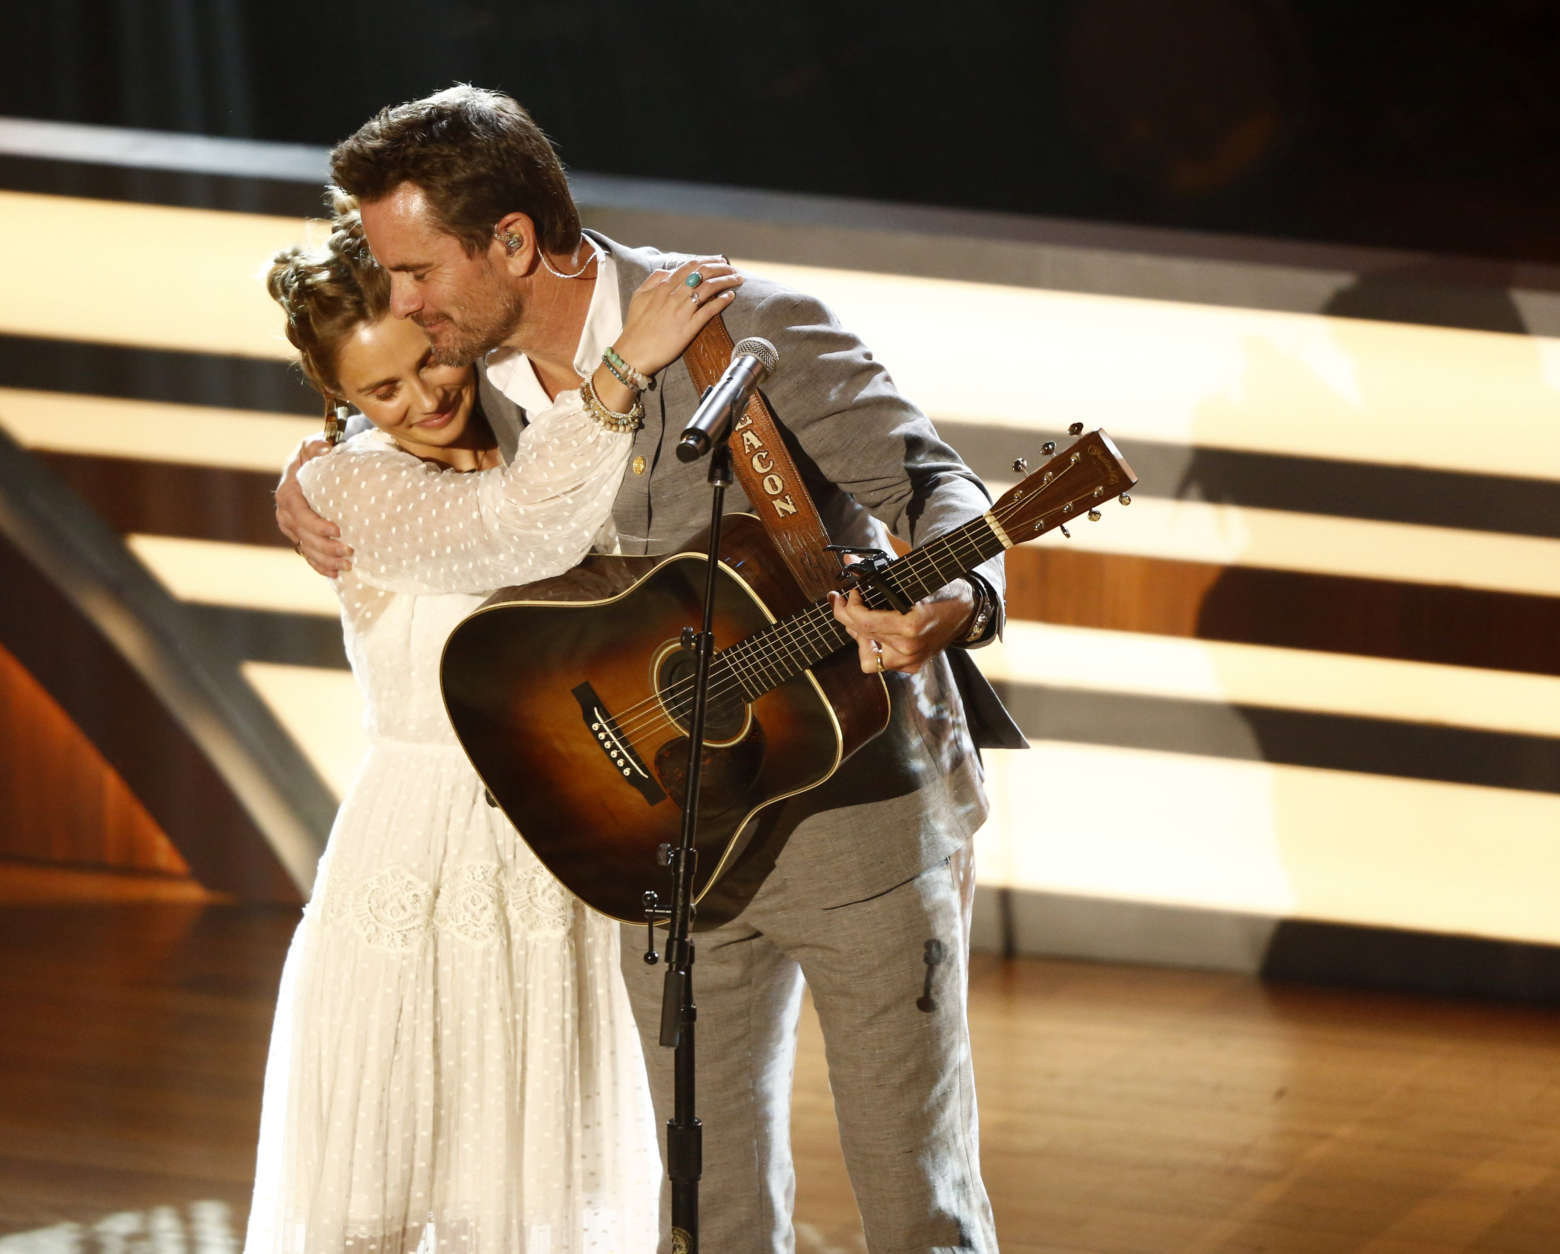 Clare Bowen and Charles Esten, of the television show "Nashville" perform during the 11th annual ACM Honors at the Ryman Auditorium on Wednesday, Aug. 23, 2017, in Nashville, Tenn. The show won the Tex Ritter Film award. (Photo by Wade Payne/Invision/AP)